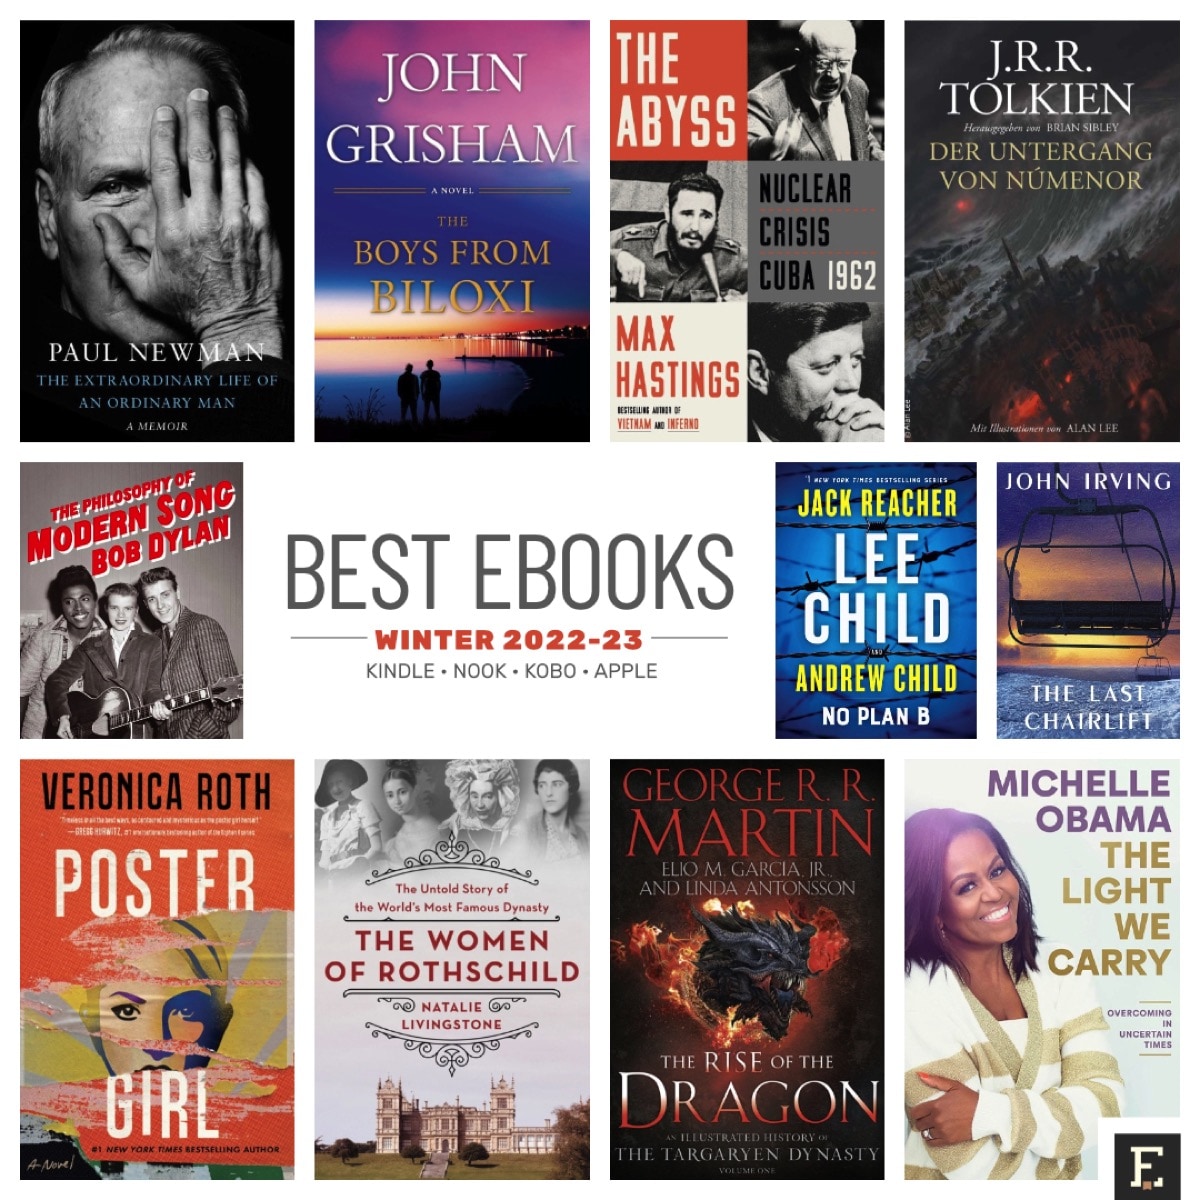 14 most interesting ebooks for 2022-23 winter holidays